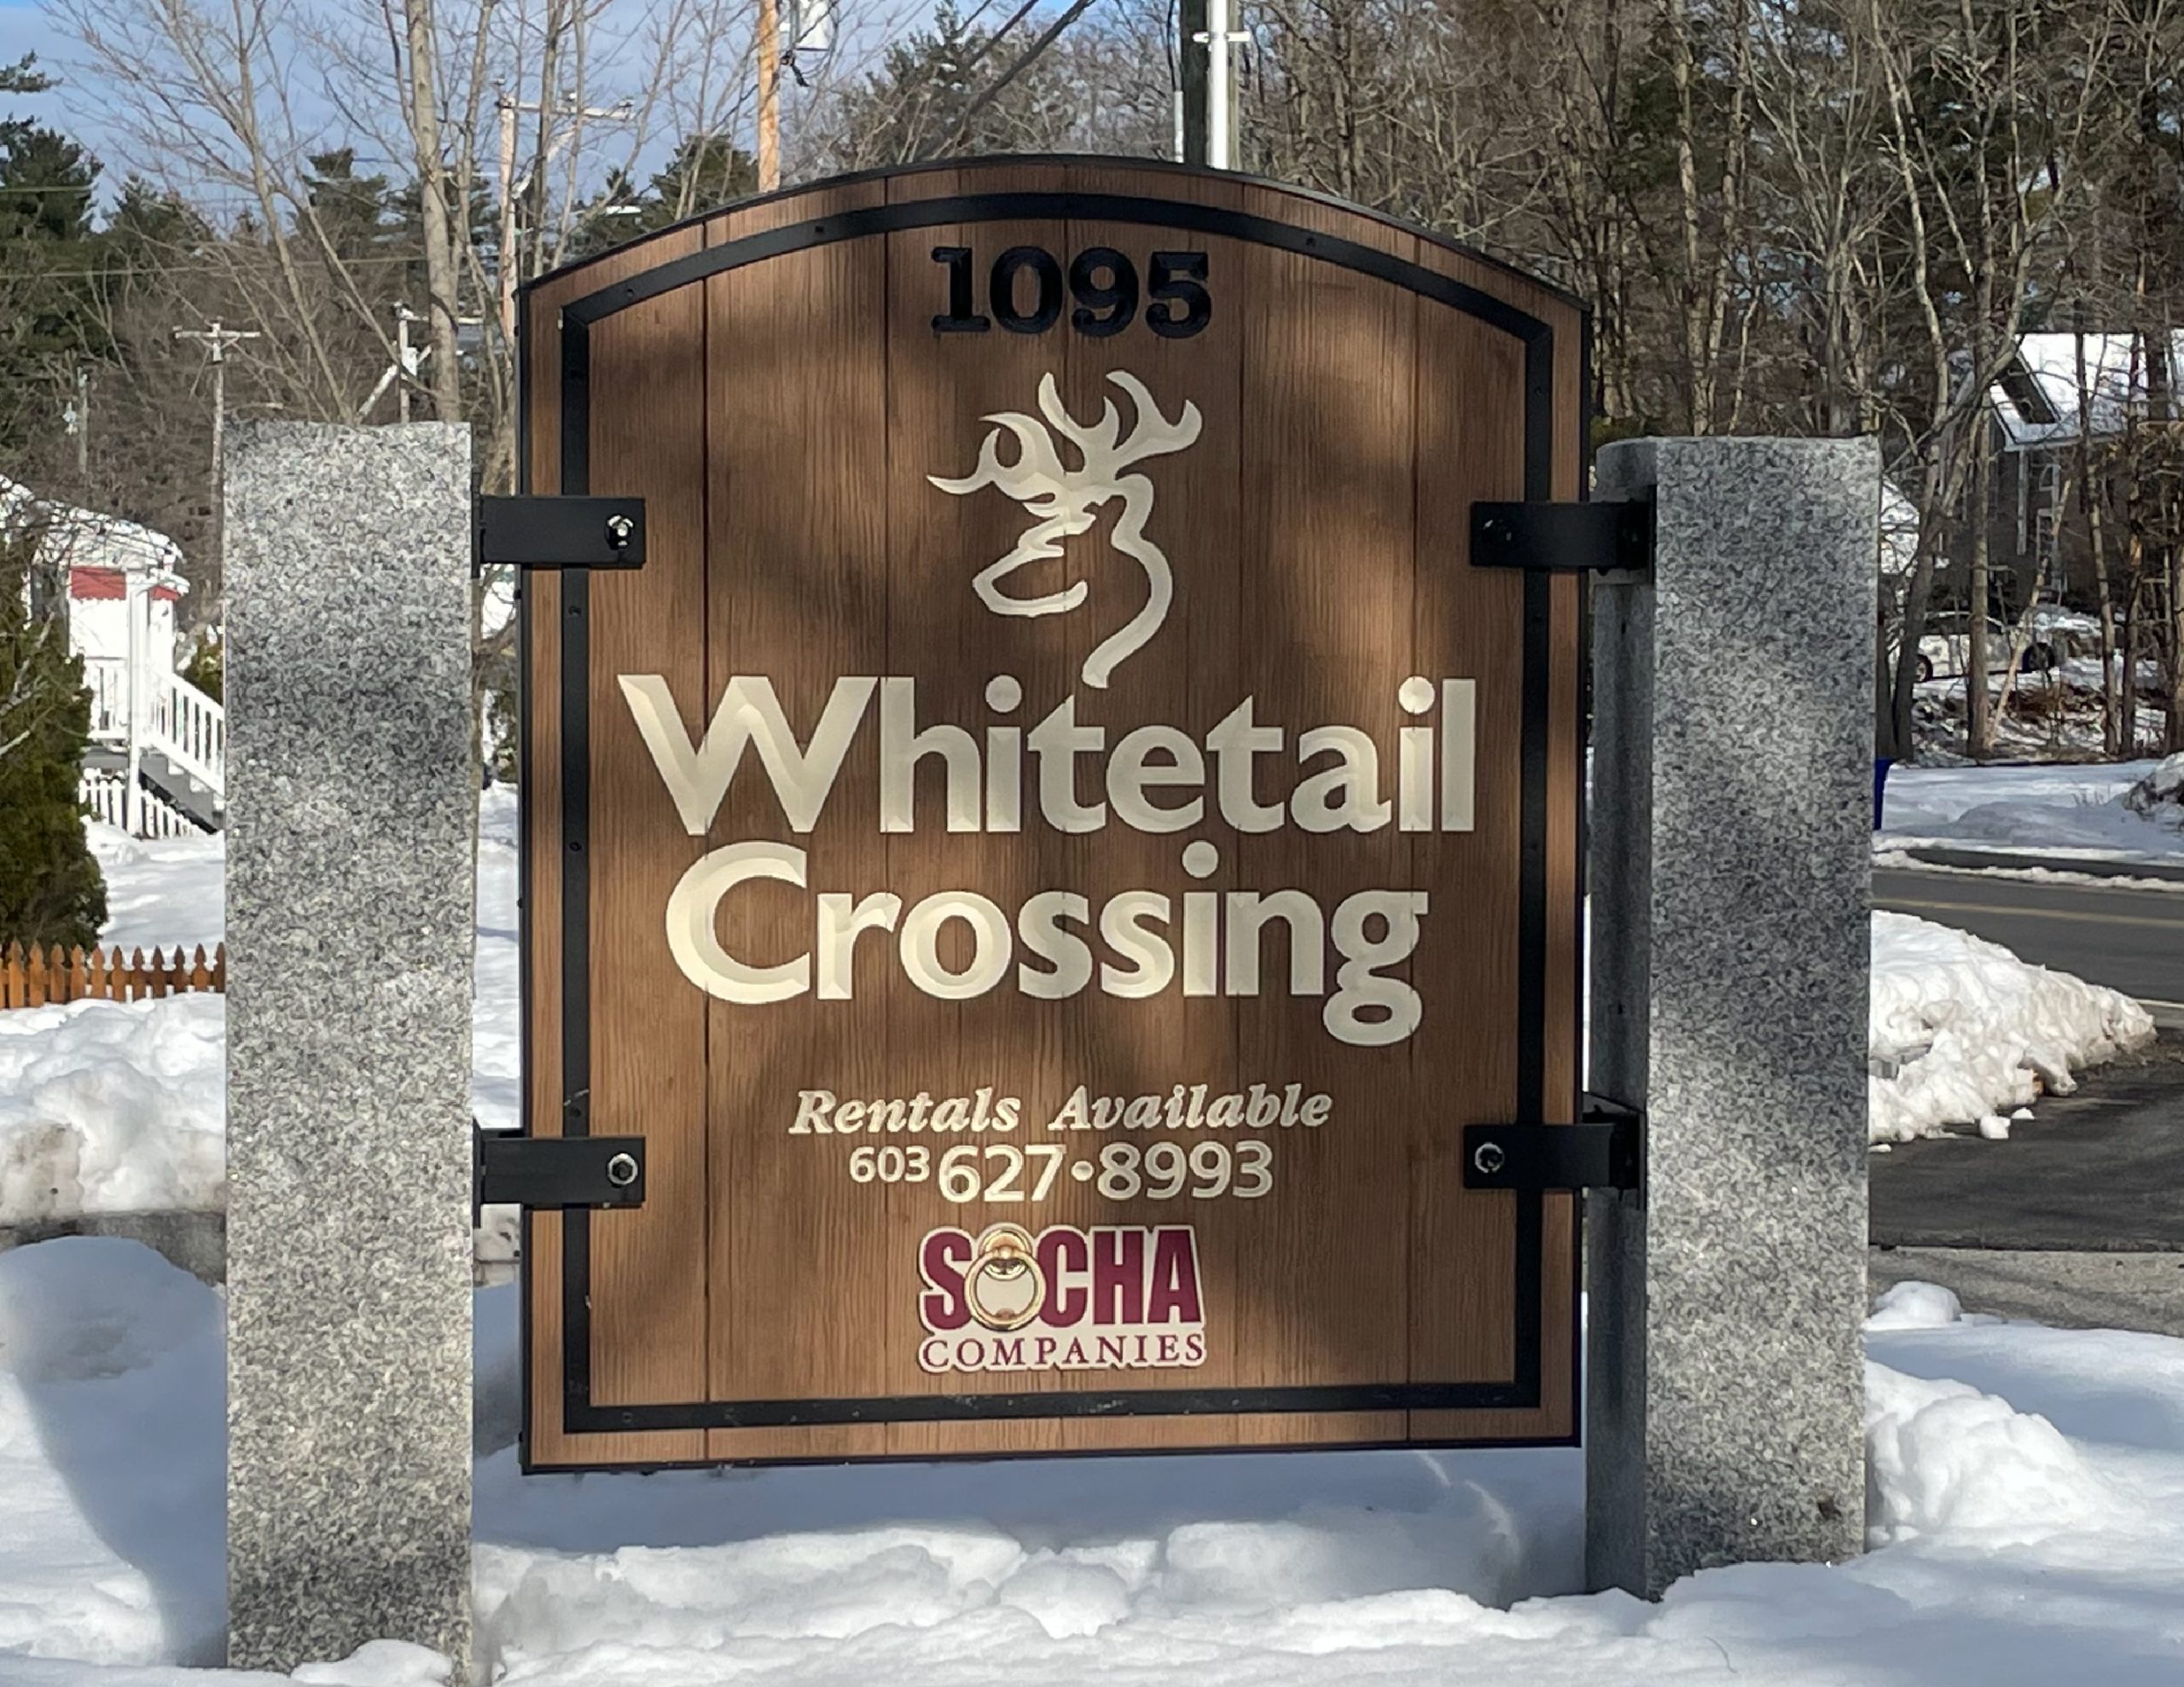 Whitetail Crossing offers open-concept townhomes with either two or three bedrooms, constructed by Socha Companies and carefully maintained for comfortable, high-end living.